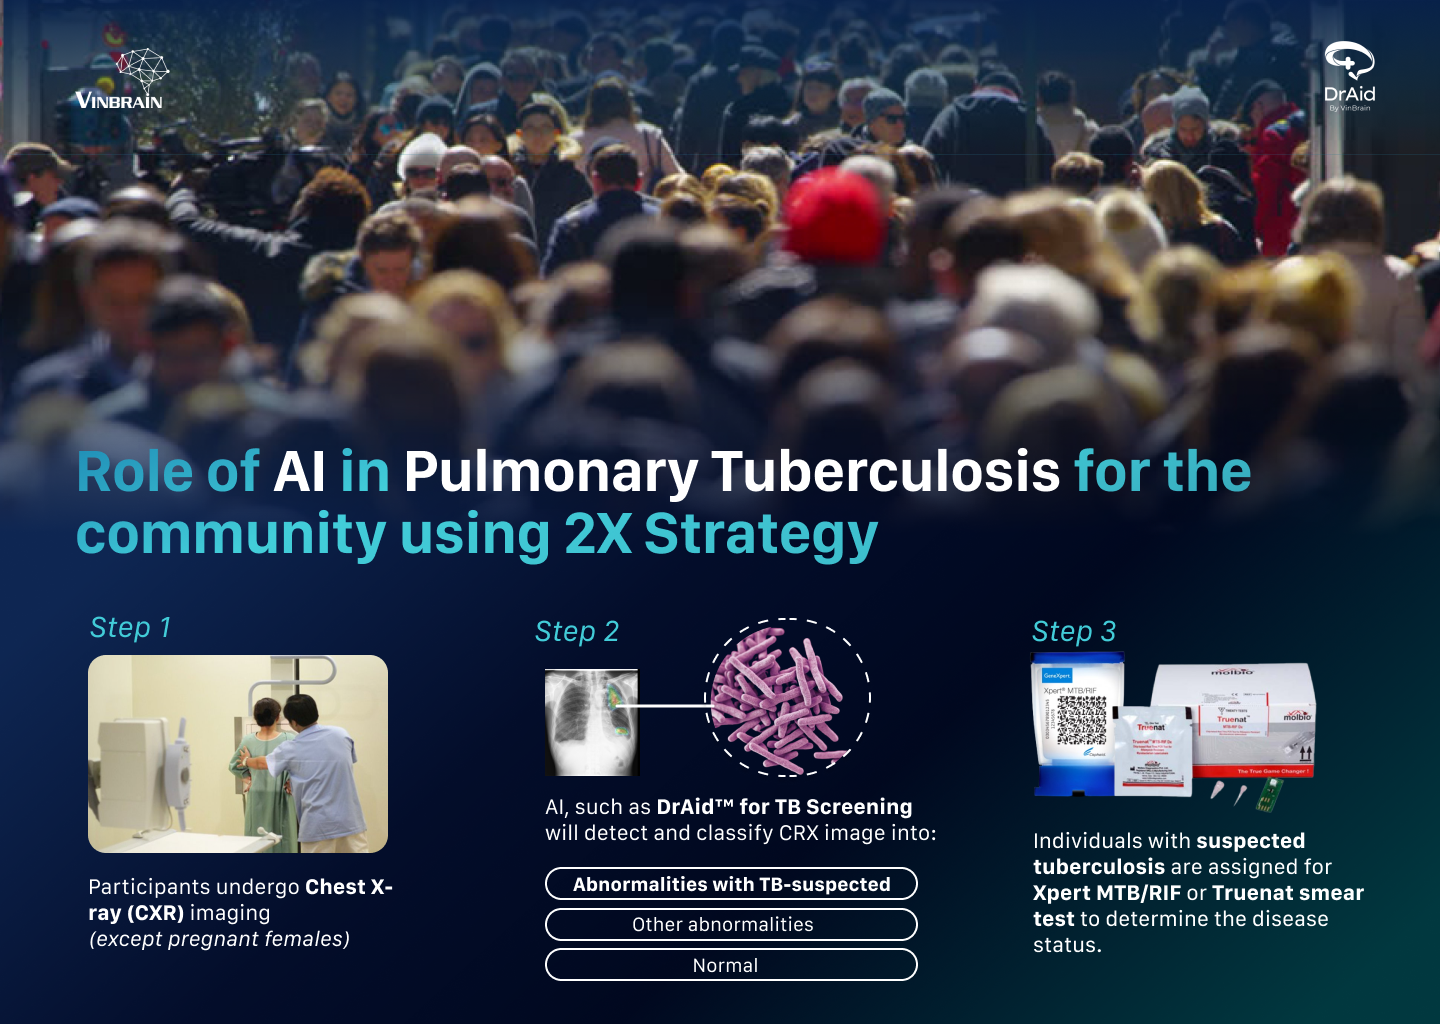 The Role of AI in Lung Tuberculosis Screening for the Community 